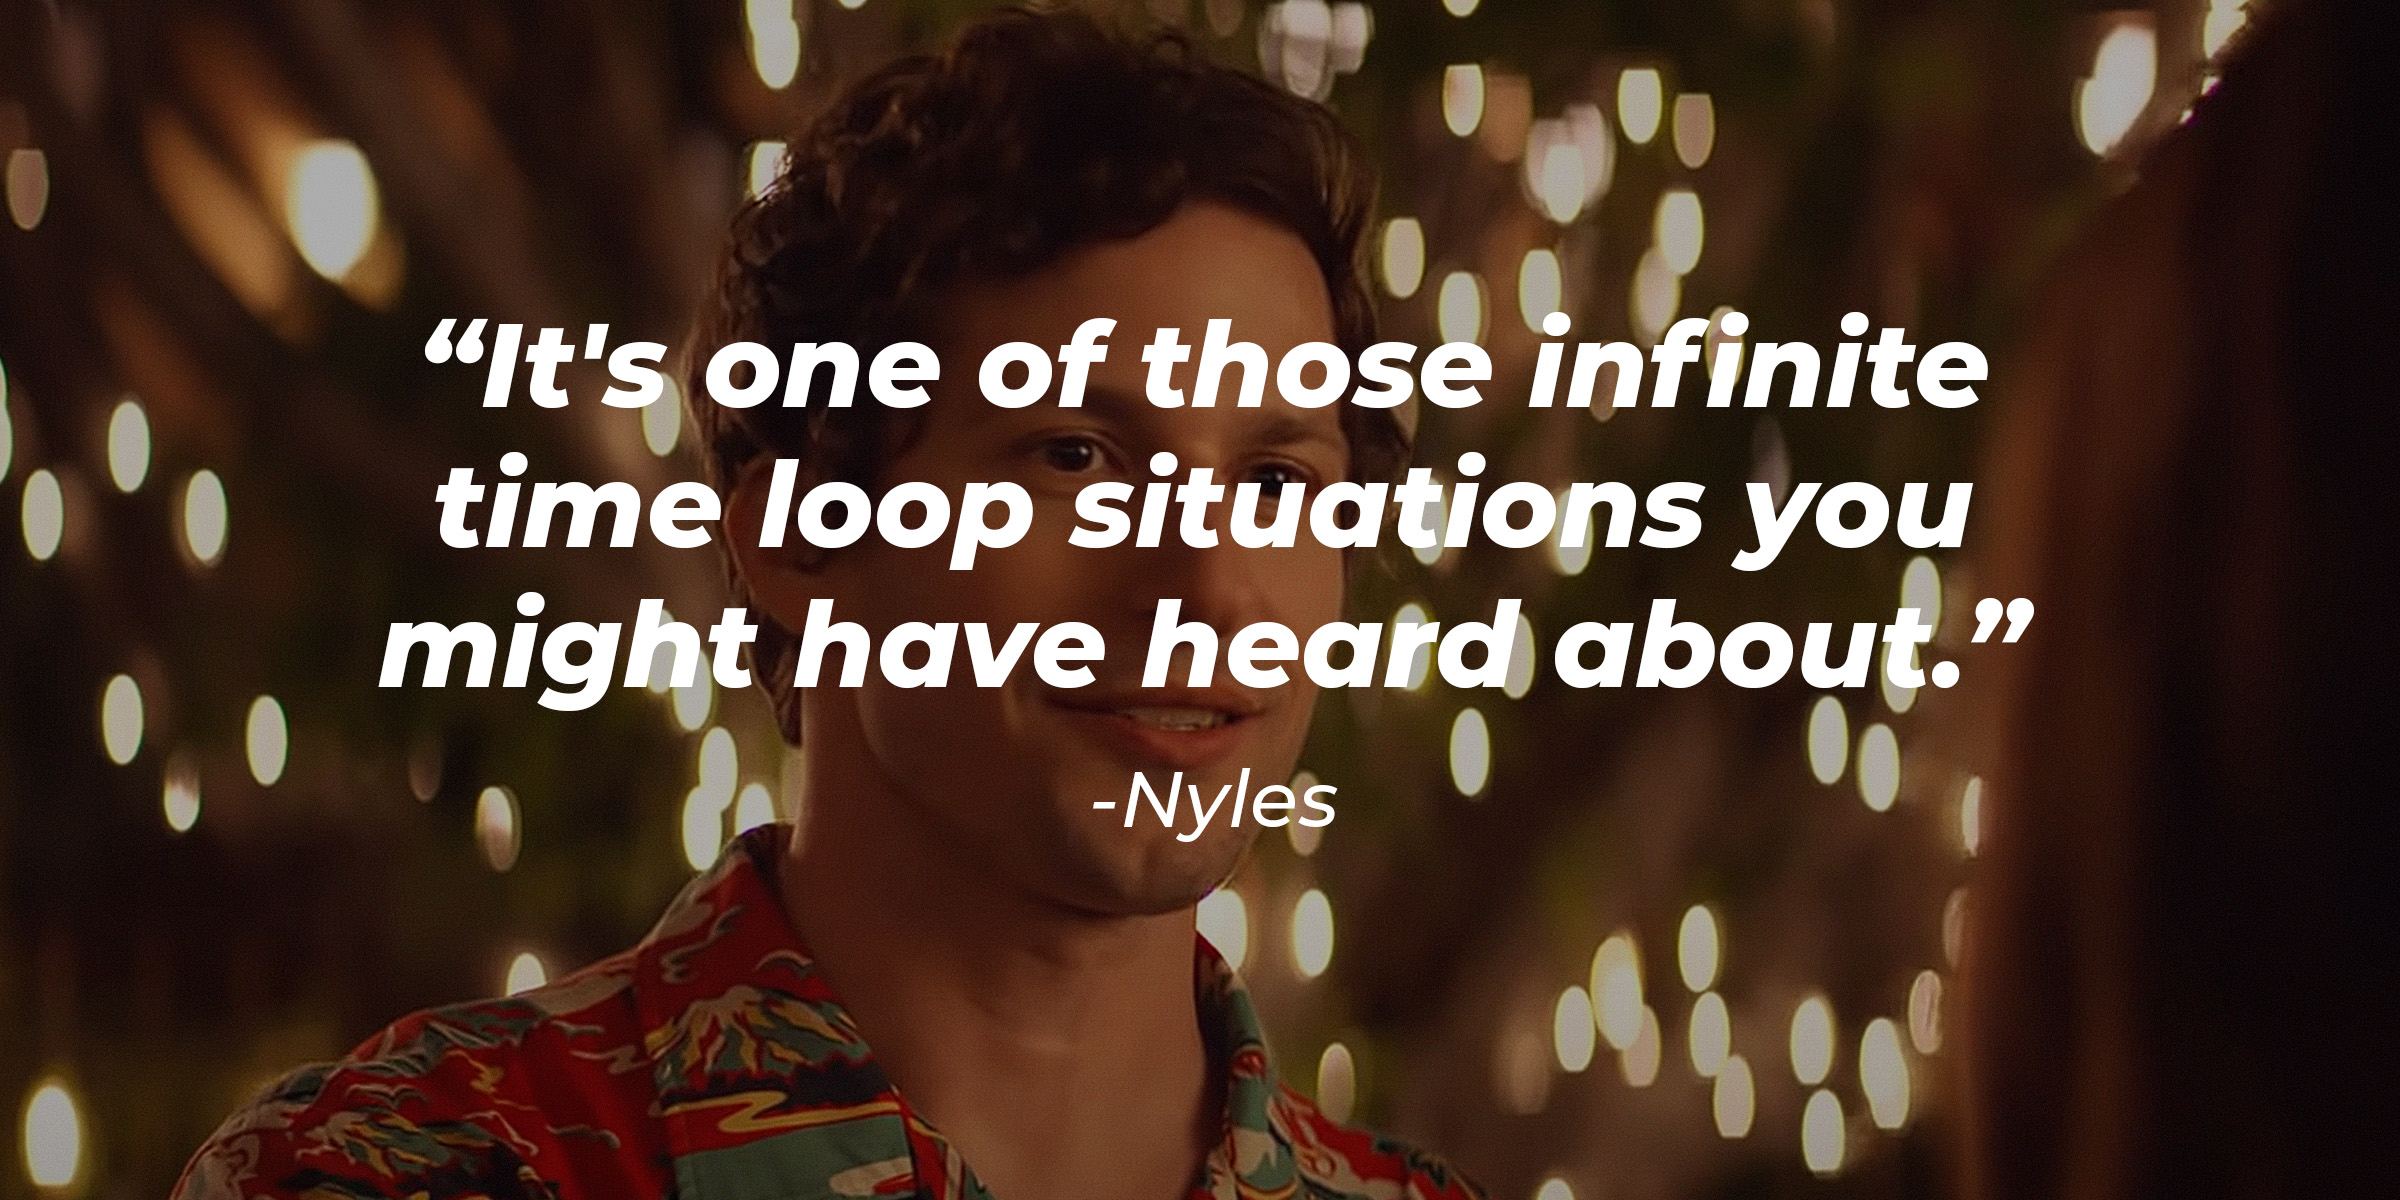 Nyles’ quote: "It's one of those infinite time loop situations you might have heard about."│Source: youtube.com/hulu